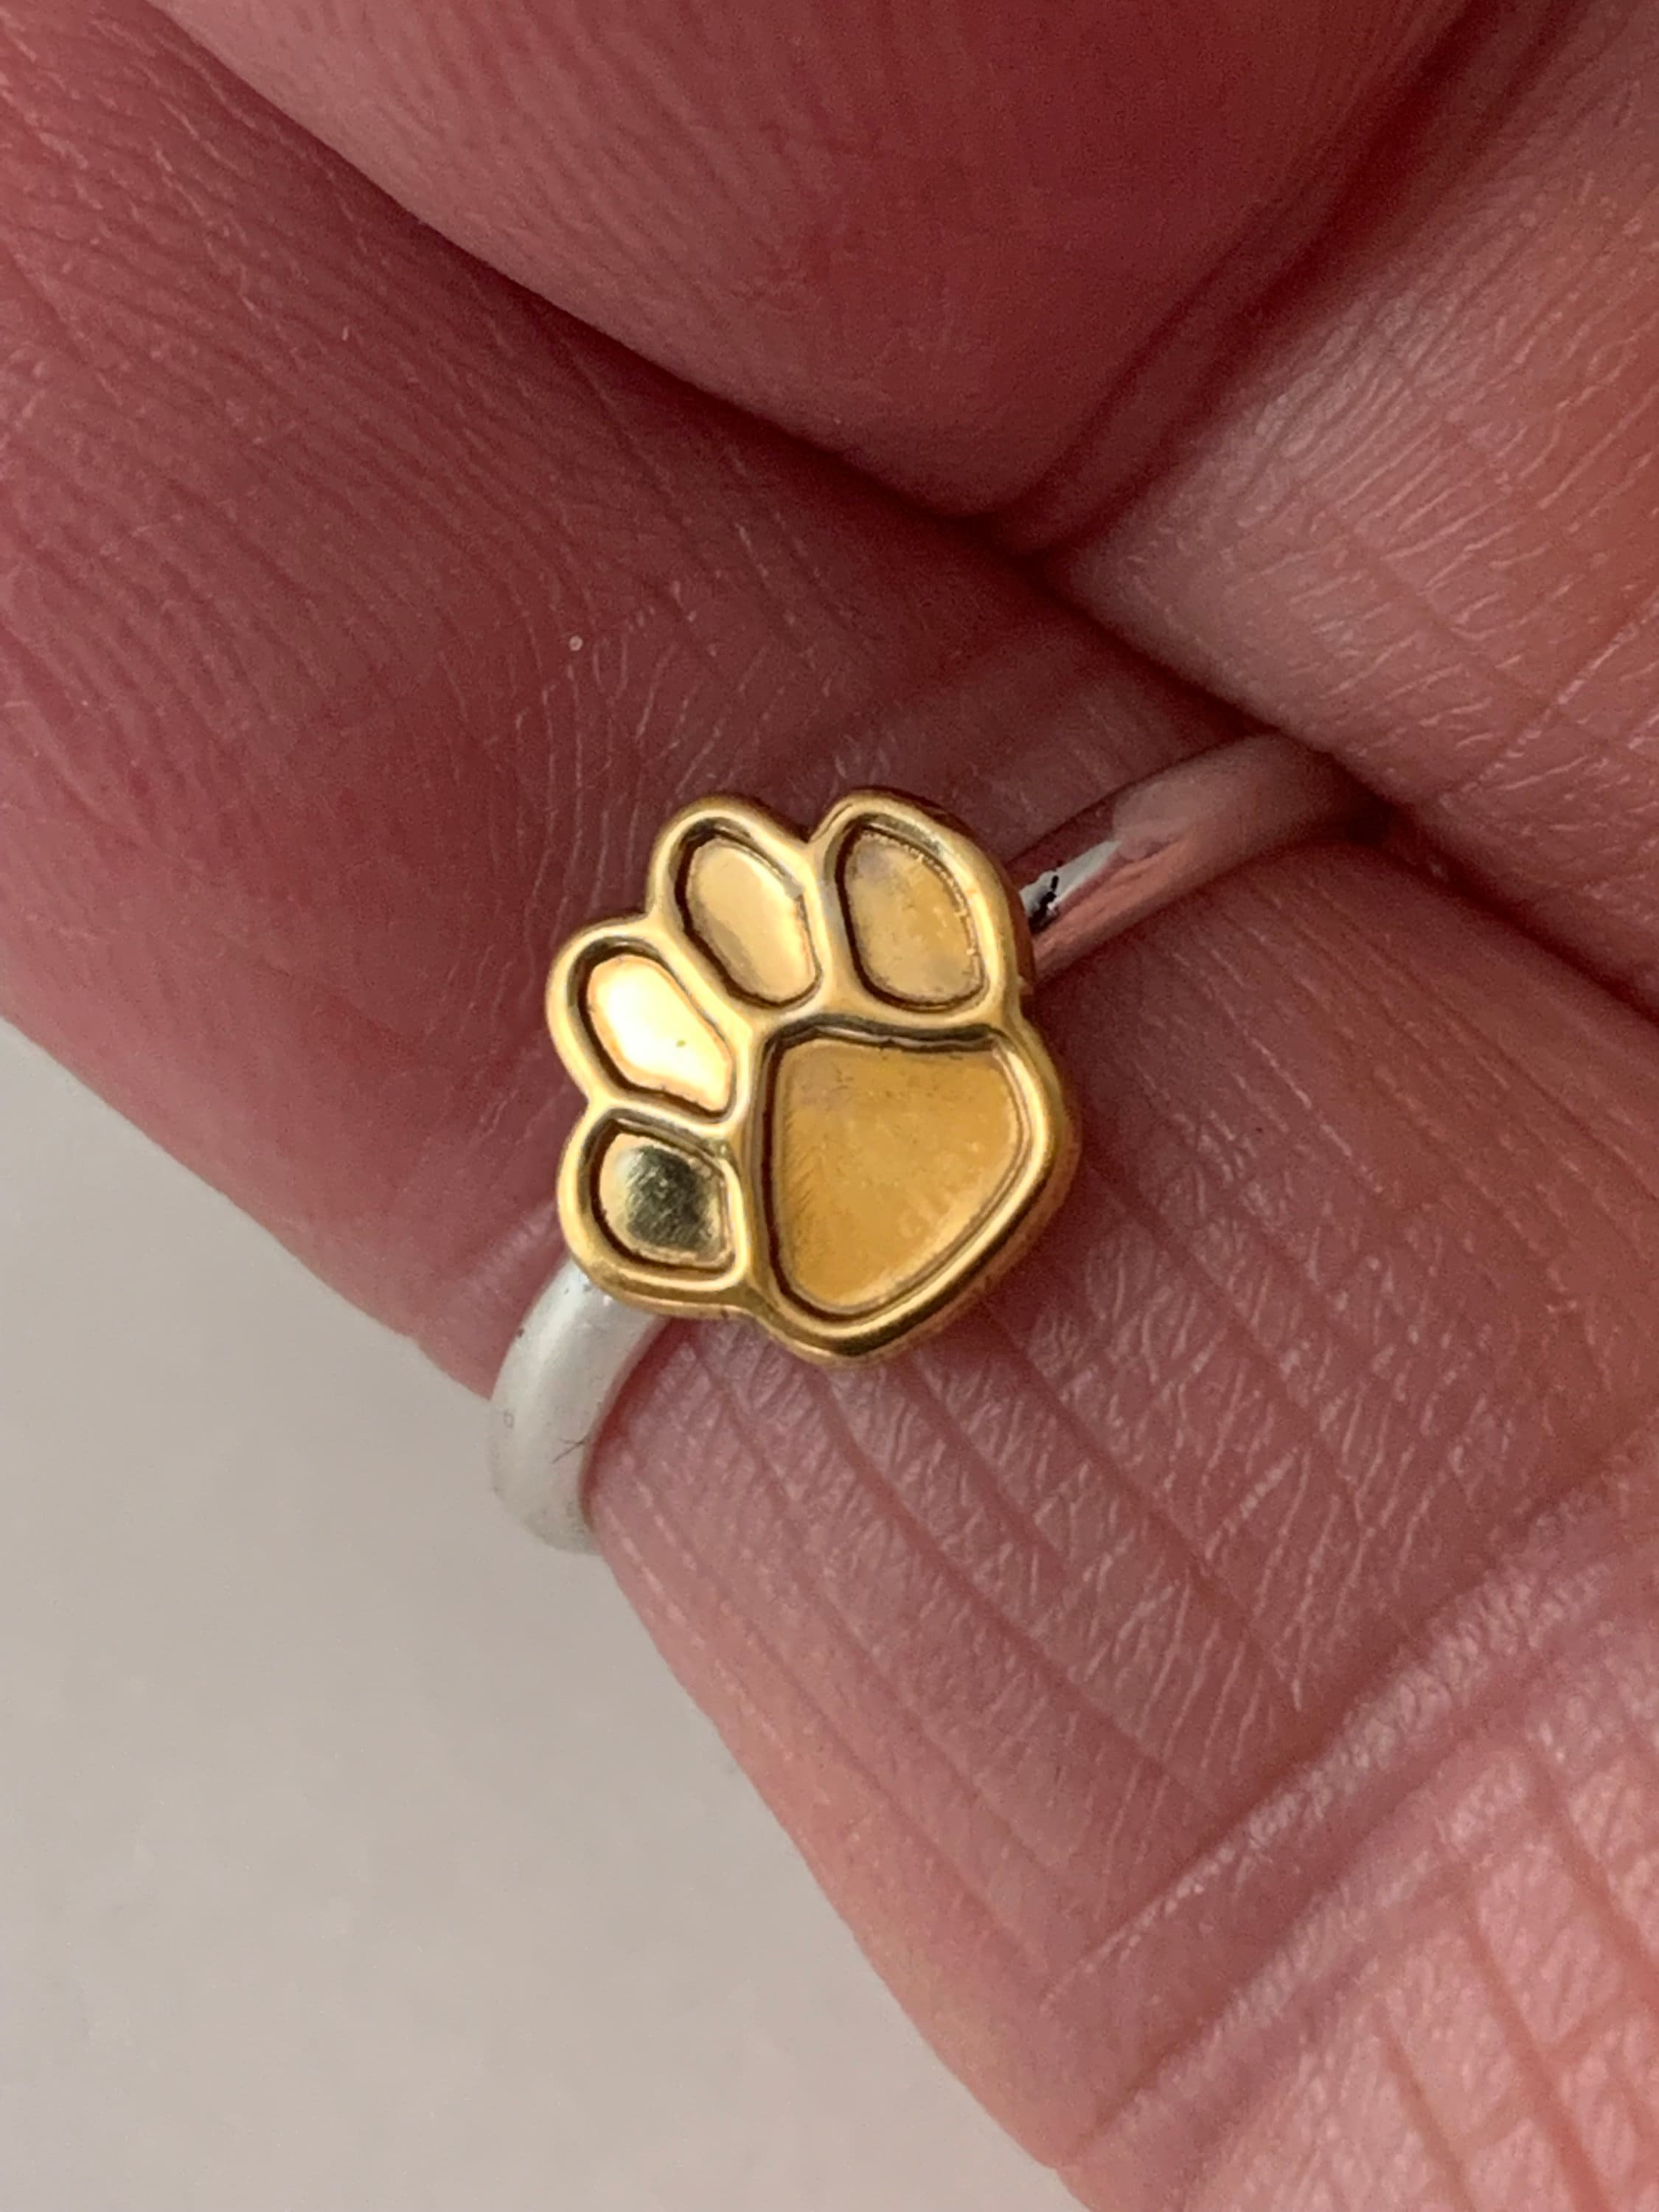 Pet Paw Print Ring, Gold Filled Dog Paw Ring, Gifts for Pet Lovers,  Stackable Ring, Adjustable Ring, Pet Jewelry, RG146 - BeadsCreation4u